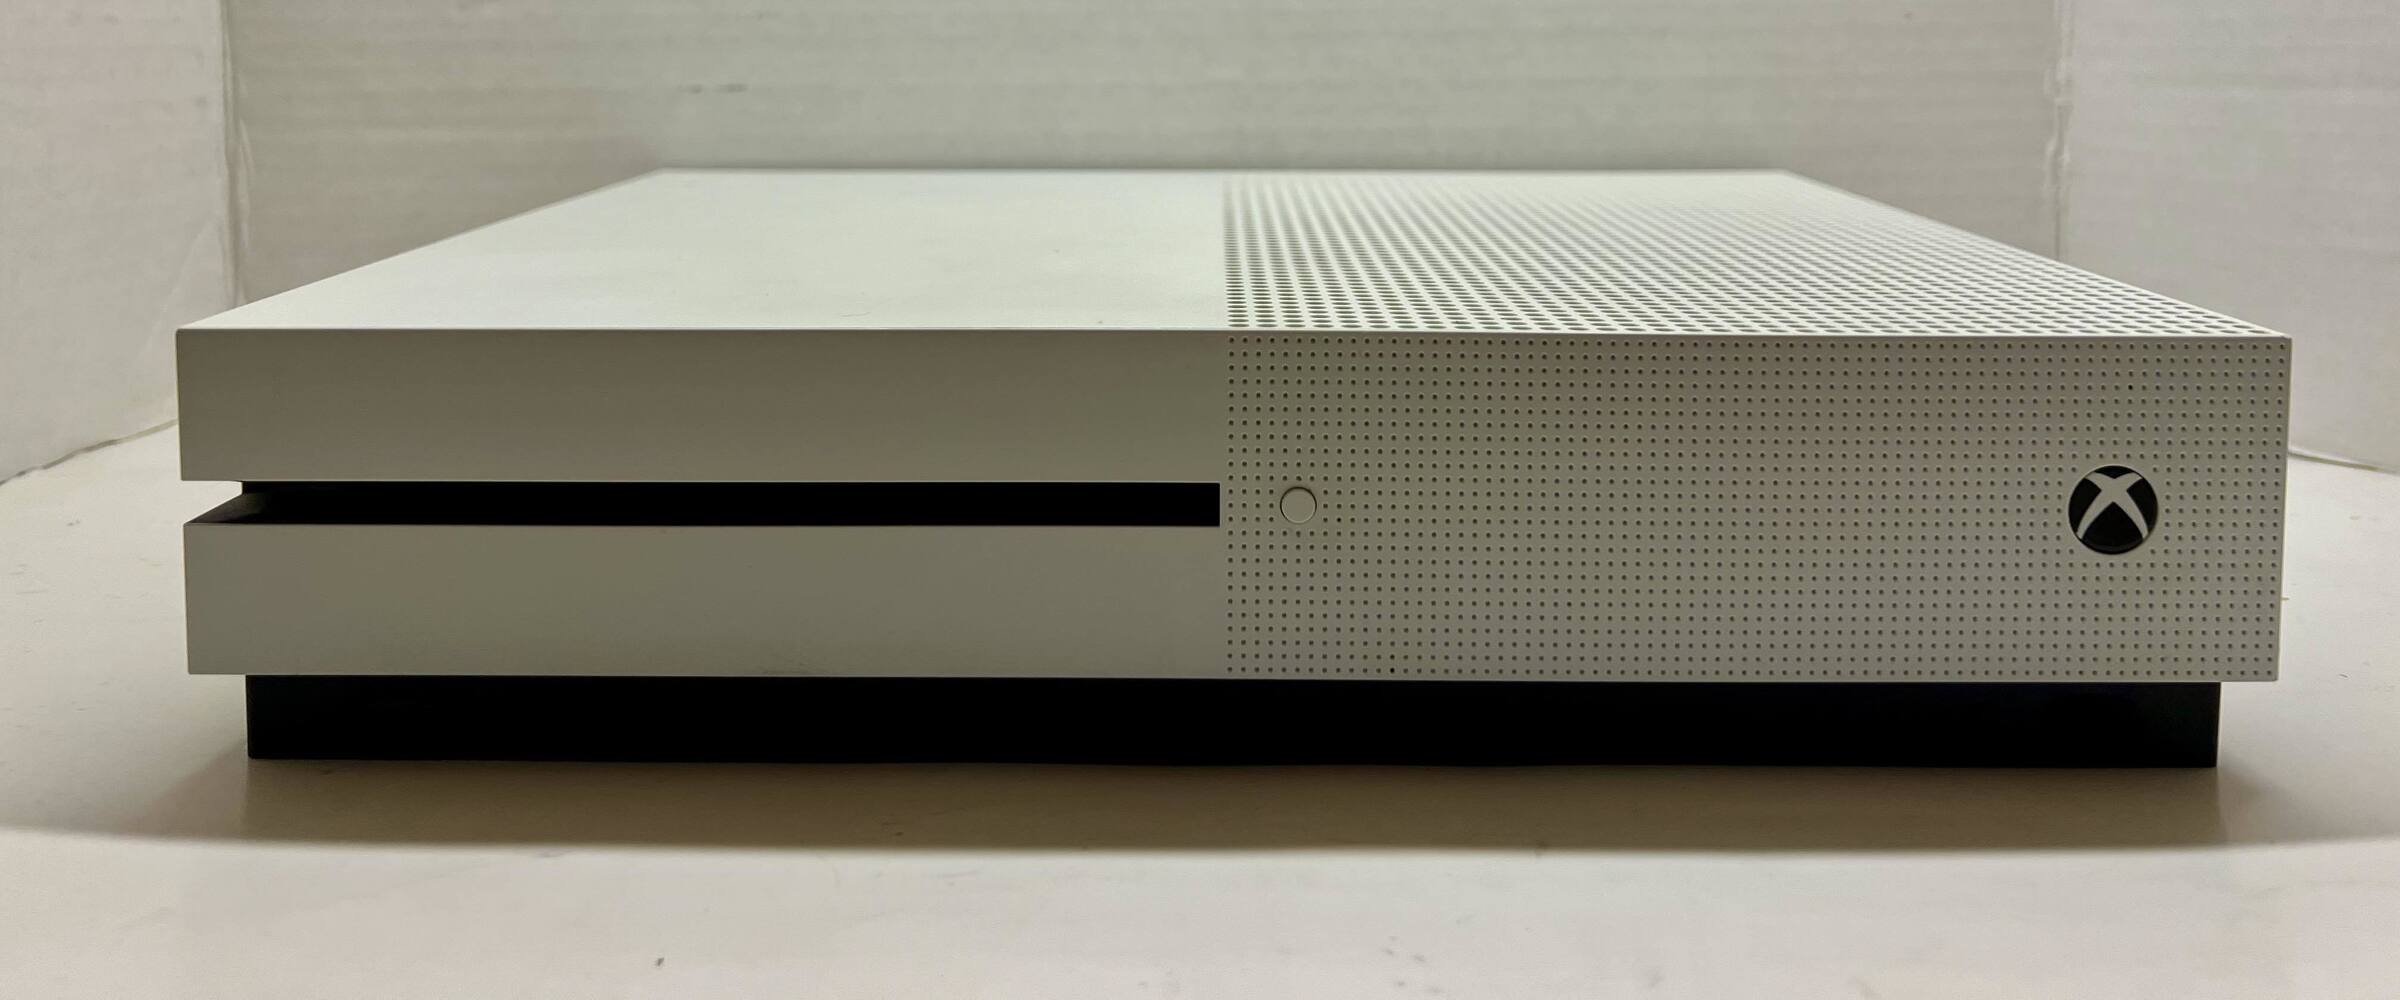 Microsoft Xbox One S 1TB White Console 1681 TESTED AND WORKS 